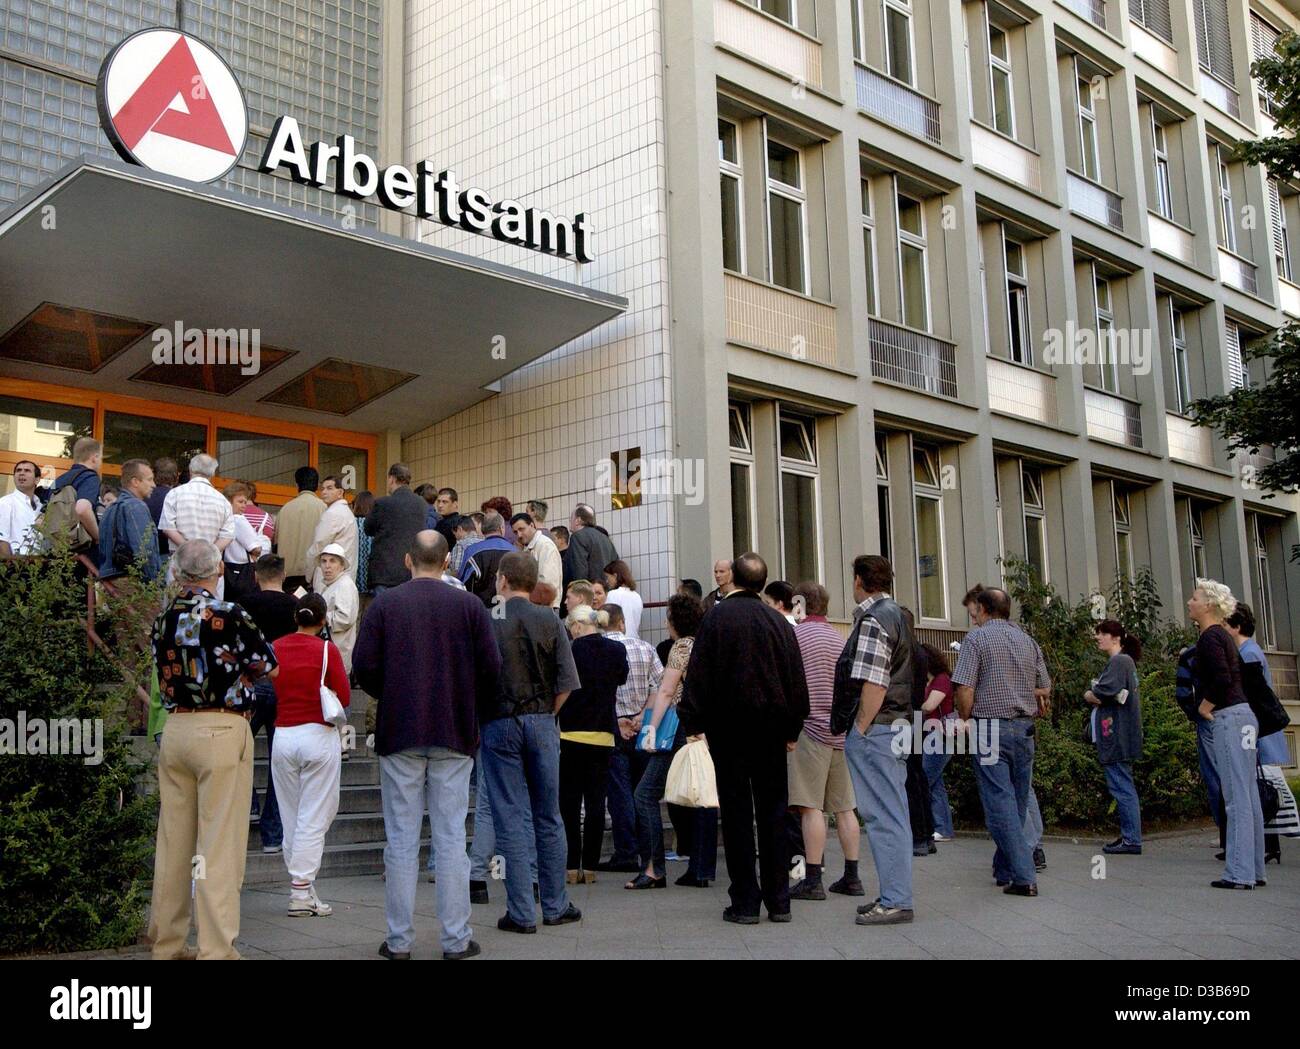 (dpa) - Many people have gathered at the entrance of a job centre (Arbeitsamt) in Berlin waiting for the doors to open, 3 September 2002. Germany suffers from high unemployment figures of about 9.7 percent. Joblessness is the central topic in the campaign for the general elections on 22 September 20 Stock Photo